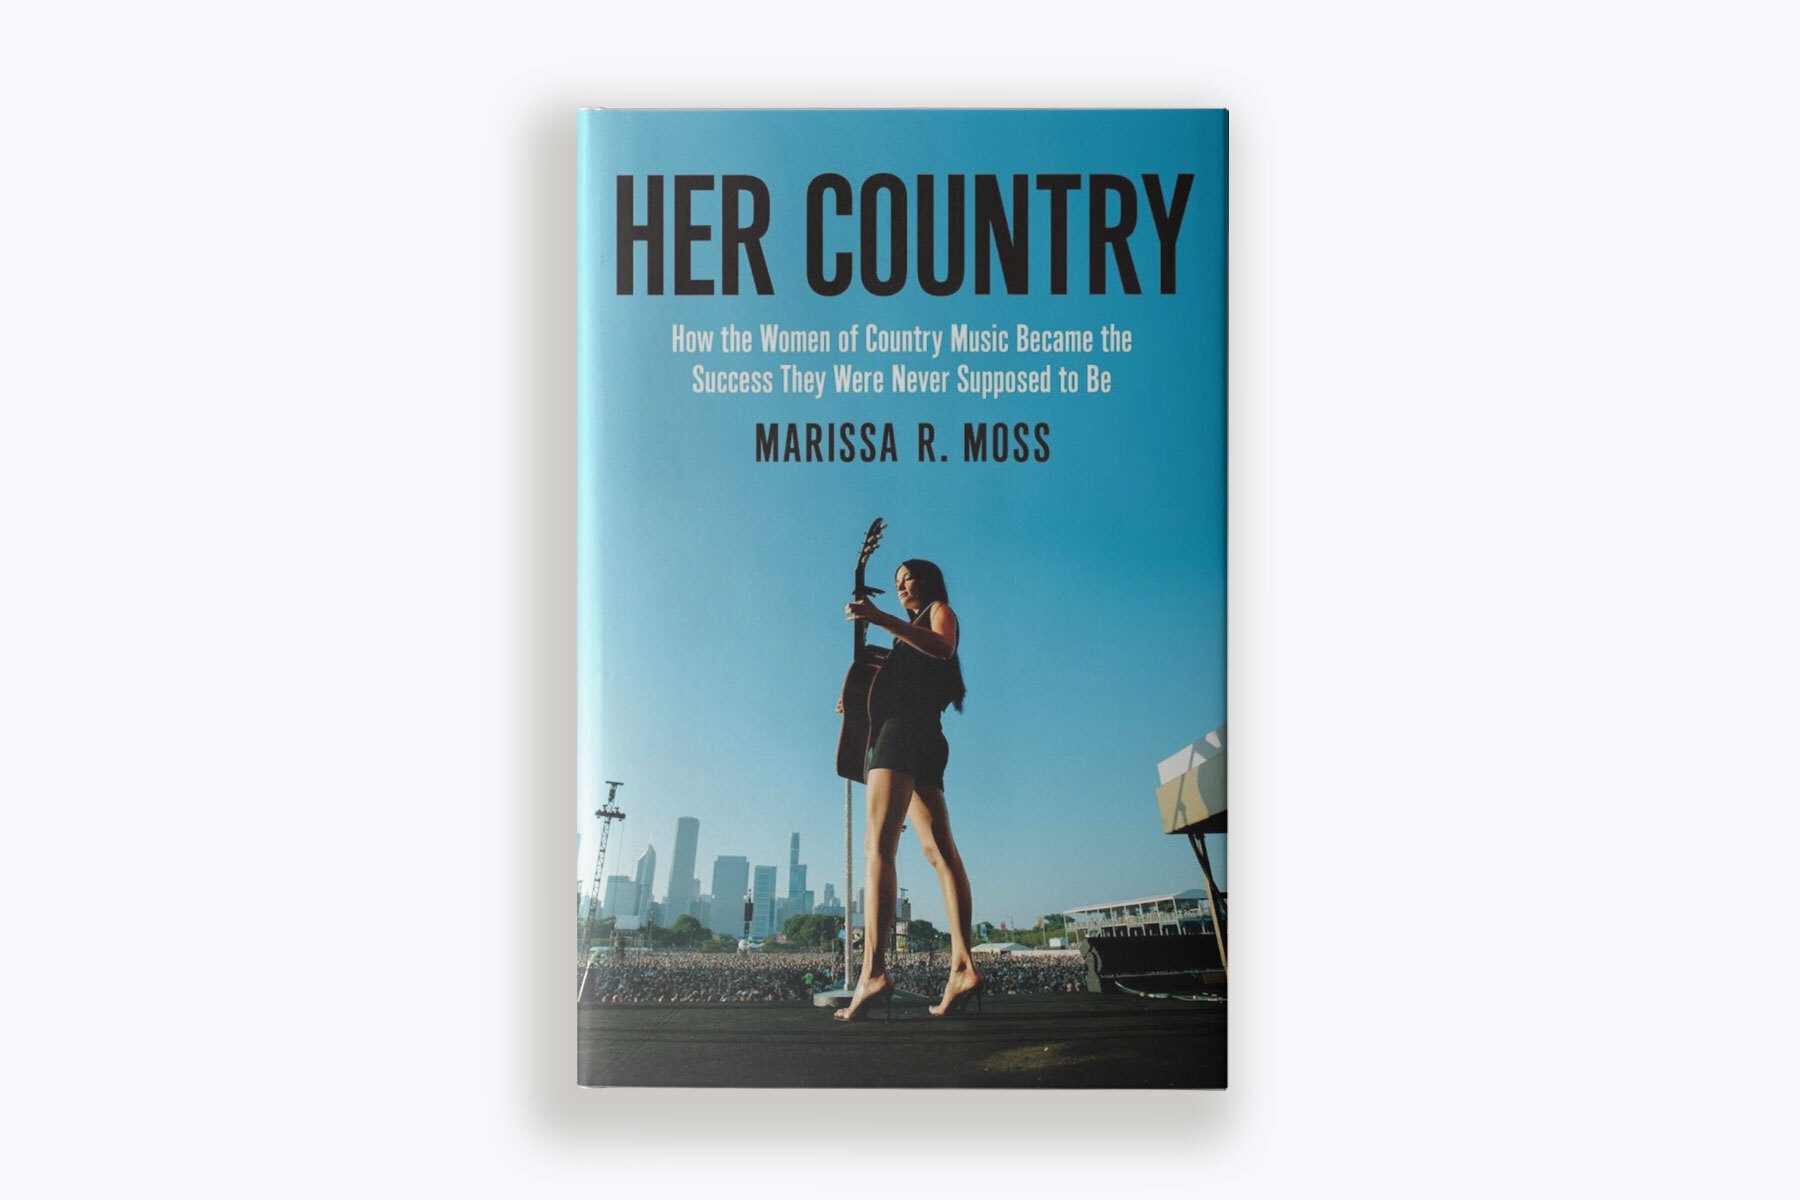 The cover of the book "Her Country."